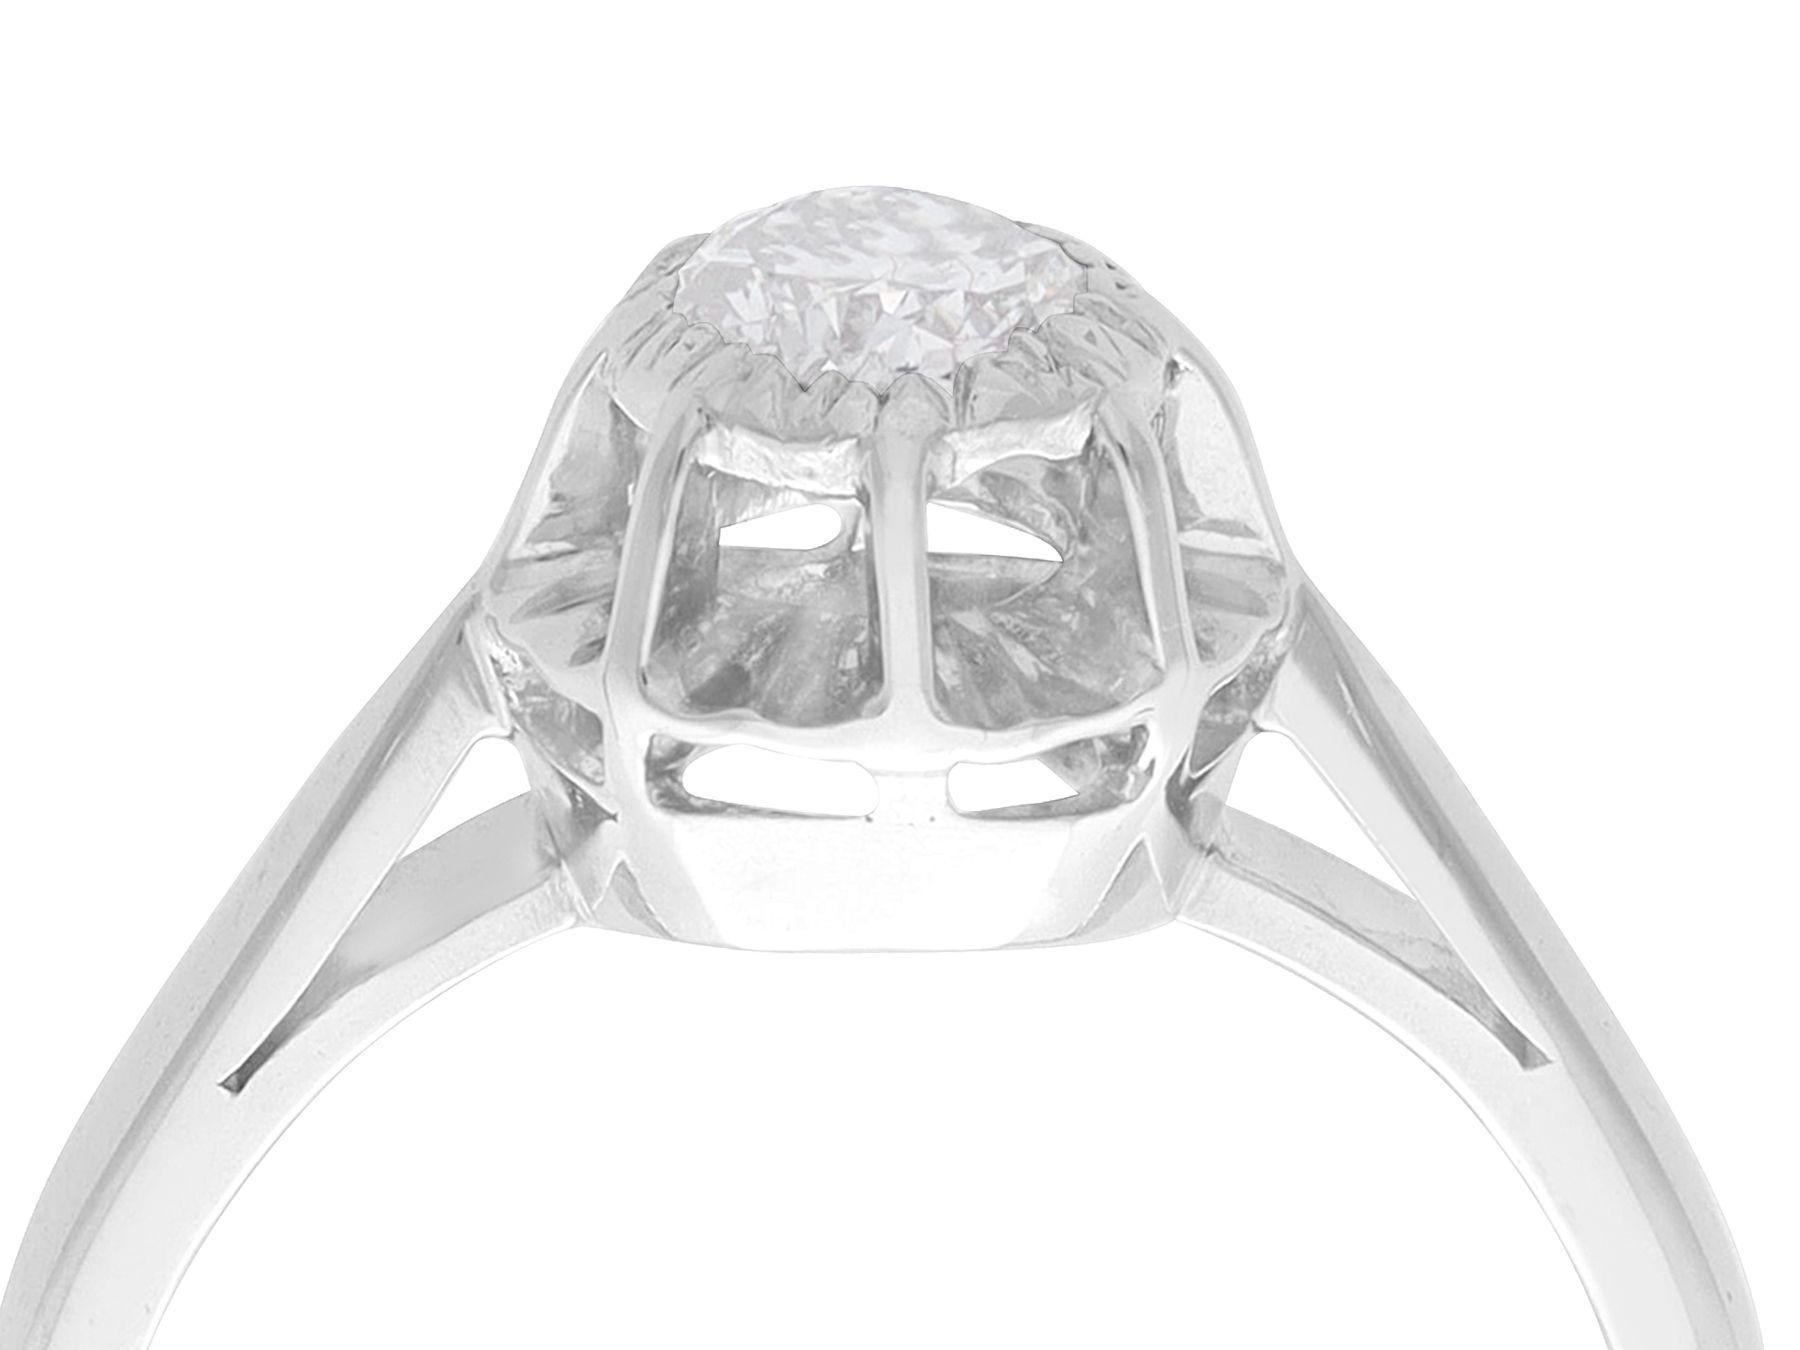 A fine and impressive 0.33 carat diamond, 18 karat white gold and platinum engagement ring; part of our diverse antique jewellery and estate jewelry collections

This fine and impressive diamond solitaire ring has been crafted in 18k white gold with